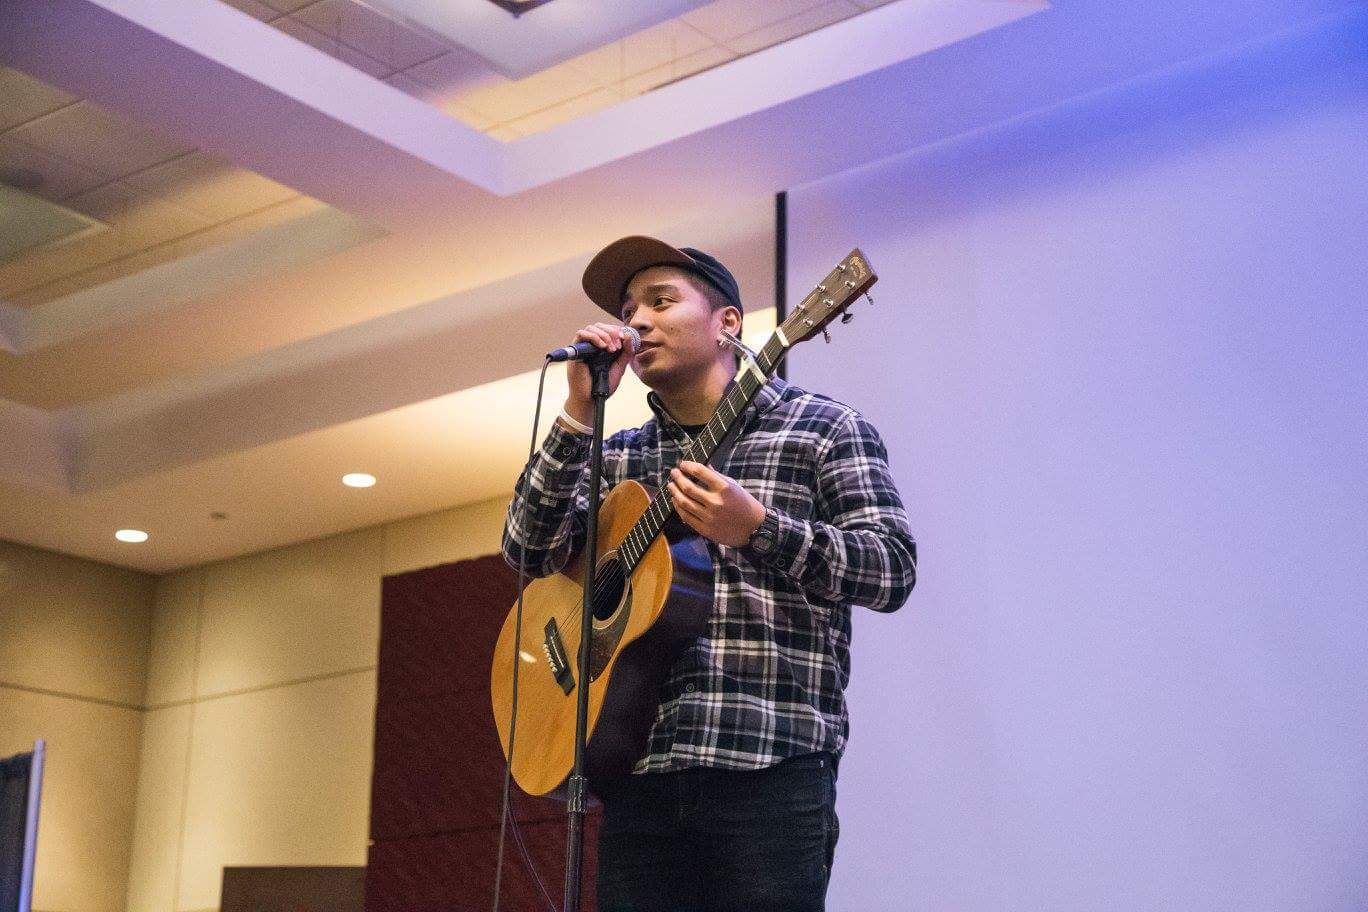 Steven Cristi also played in events at UIC and around NEIU. He uploads music videos of his orig- inal songs on youtube and Facebook under the name of Steven Cristi.